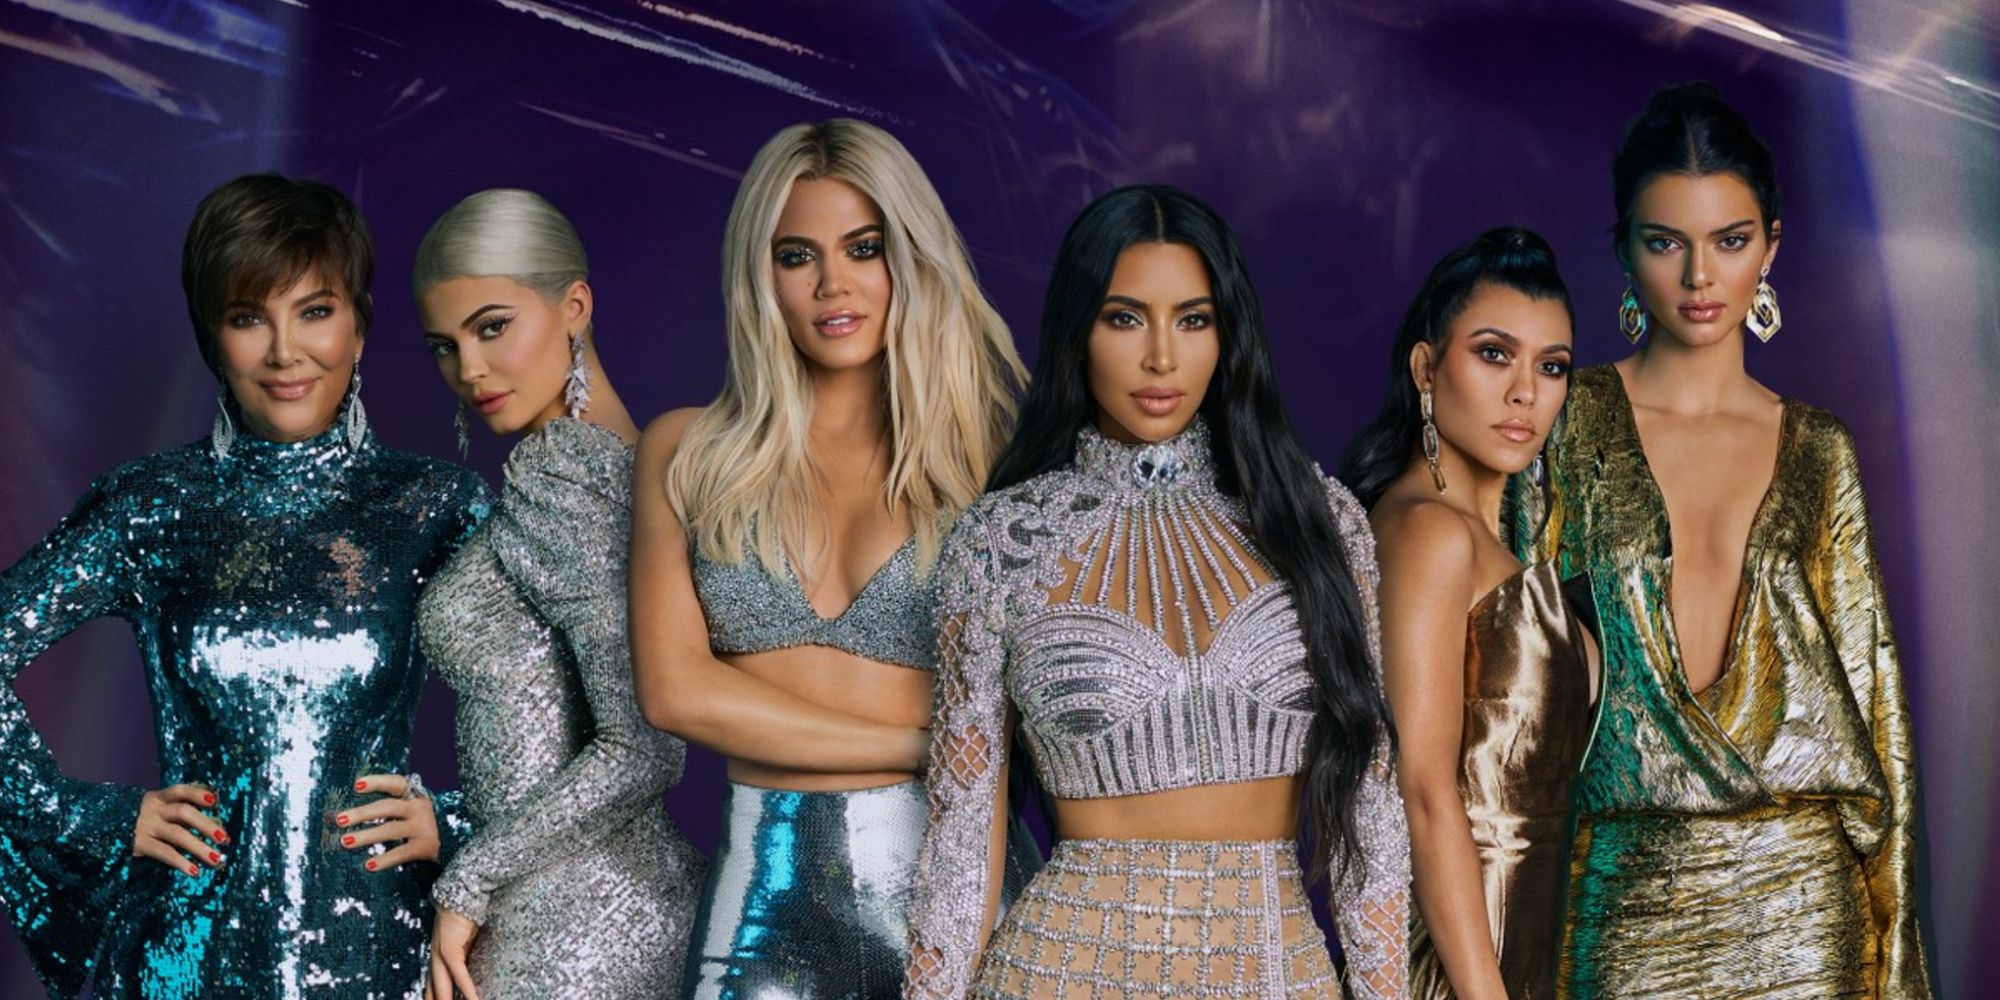 The Kardashians Invited To Met Gala As A Family For The First Time